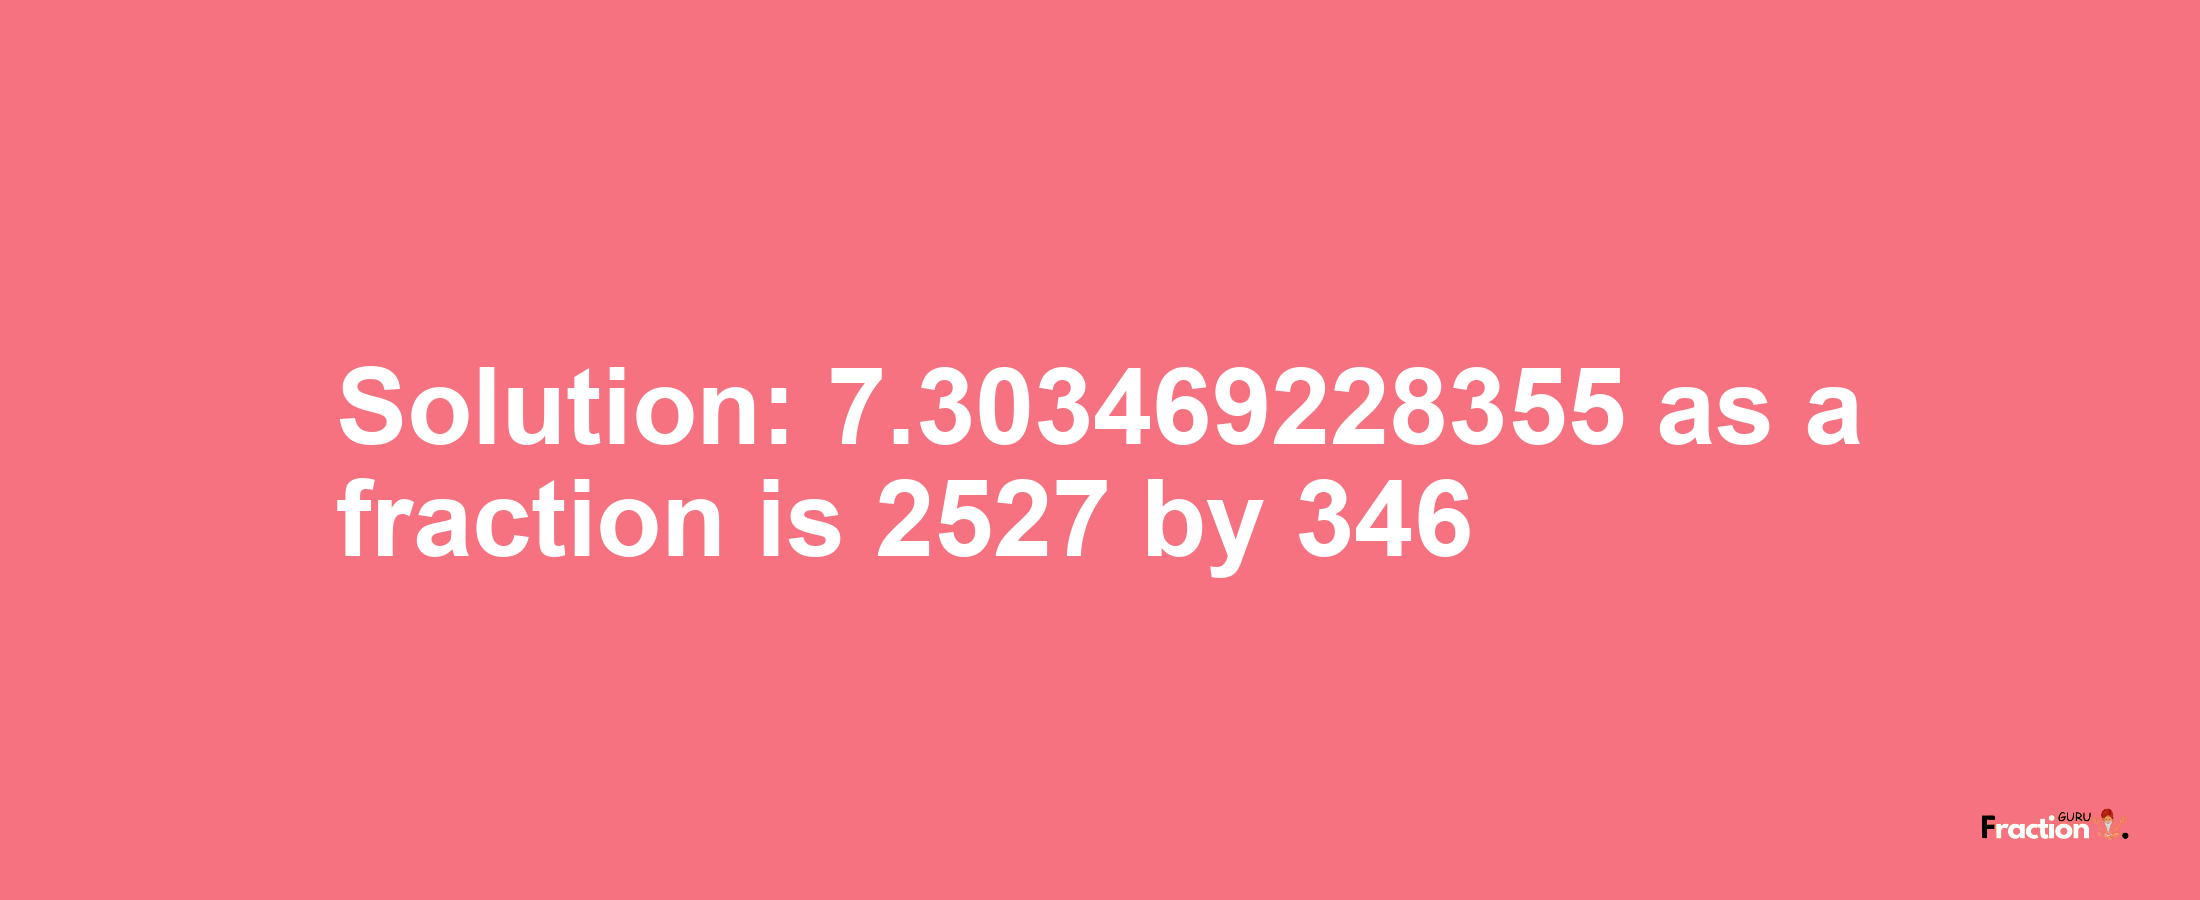 Solution:7.303469228355 as a fraction is 2527/346